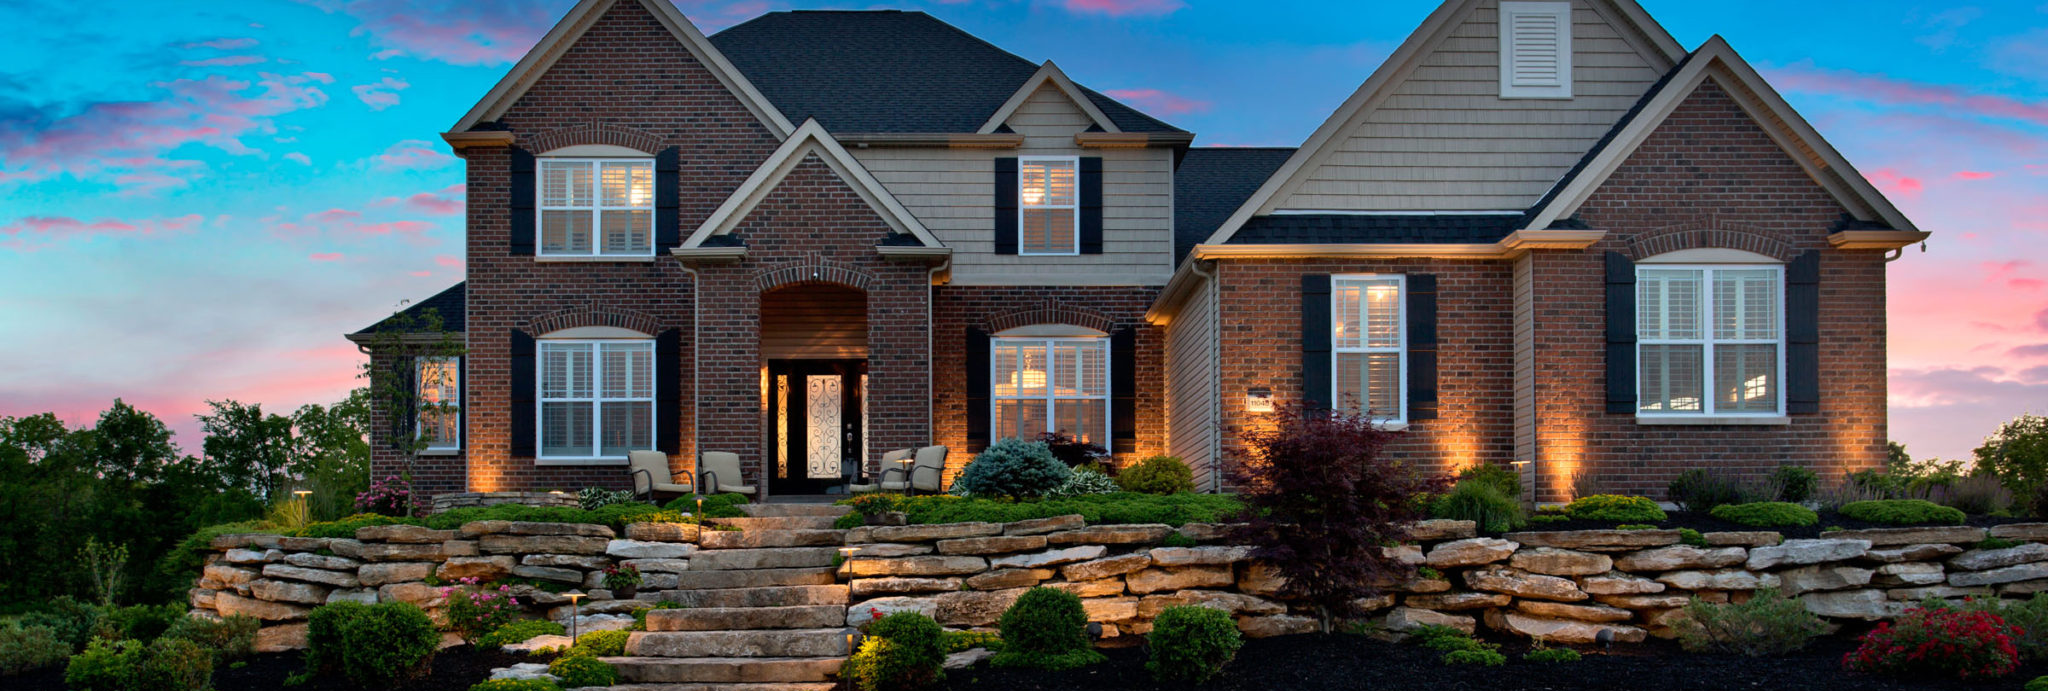 Outdoor Lighting: 5 Ways to Secure Your Home